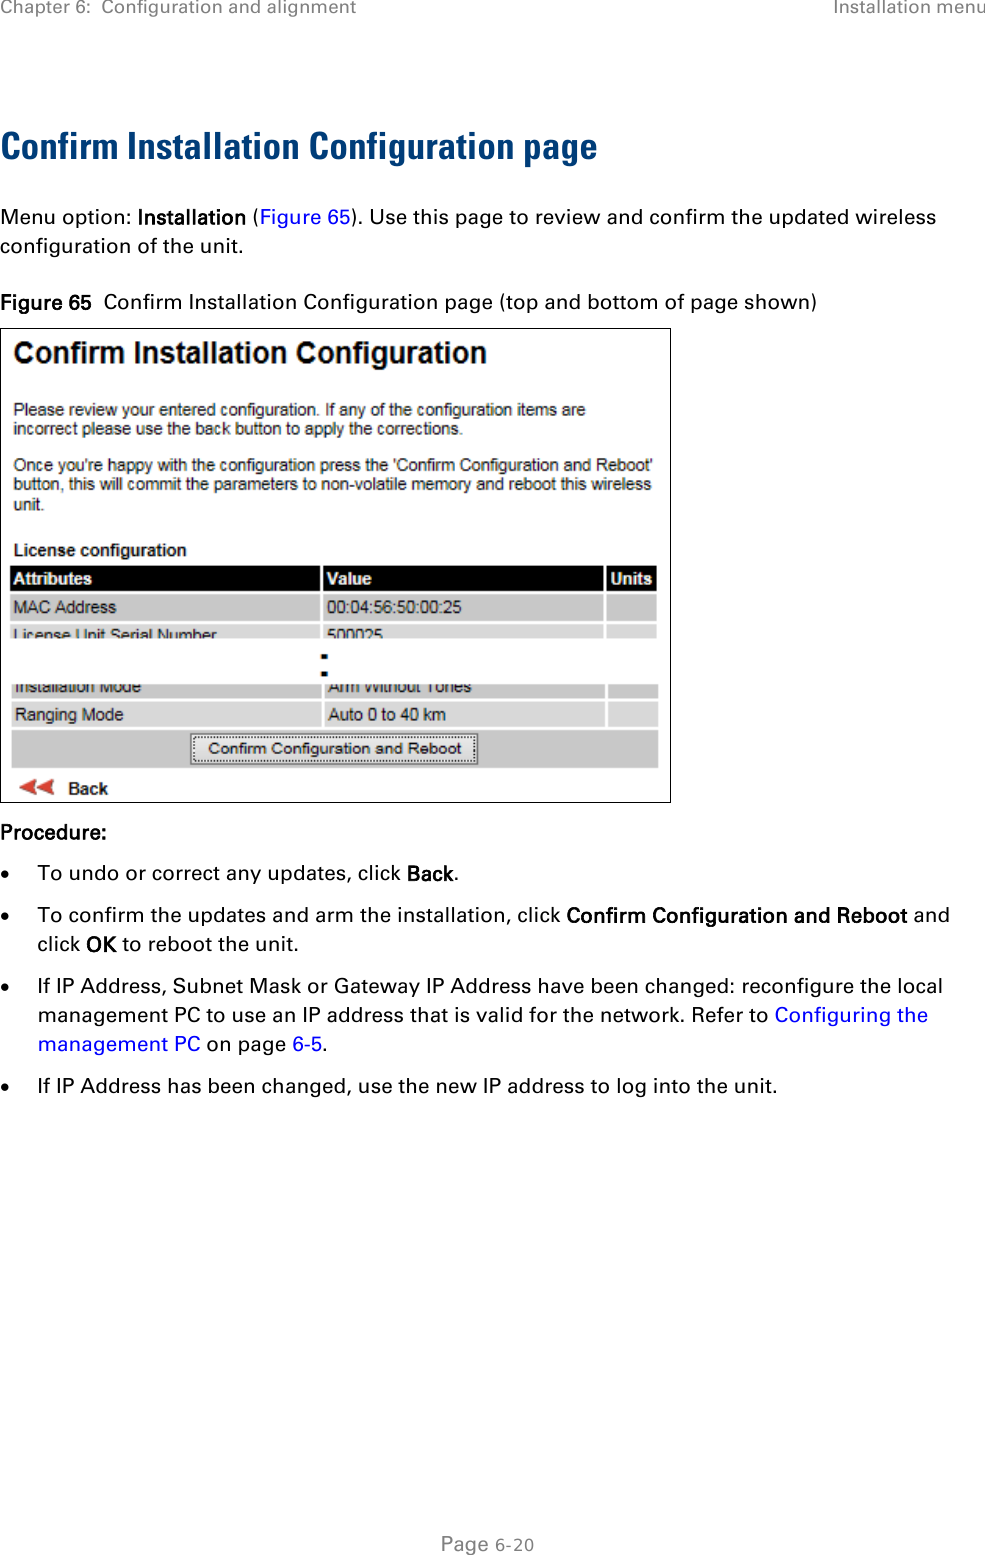 Chapter 6:  Configuration and alignment Installation menu  Confirm Installation Configuration page Menu option: Installation (Figure 65). Use this page to review and confirm the updated wireless configuration of the unit. Figure 65  Confirm Installation Configuration page (top and bottom of page shown)  Procedure: • To undo or correct any updates, click Back. • To confirm the updates and arm the installation, click Confirm Configuration and Reboot and click OK to reboot the unit. • If IP Address, Subnet Mask or Gateway IP Address have been changed: reconfigure the local management PC to use an IP address that is valid for the network. Refer to Configuring the management PC on page 6-5. • If IP Address has been changed, use the new IP address to log into the unit.    Page 6-20 